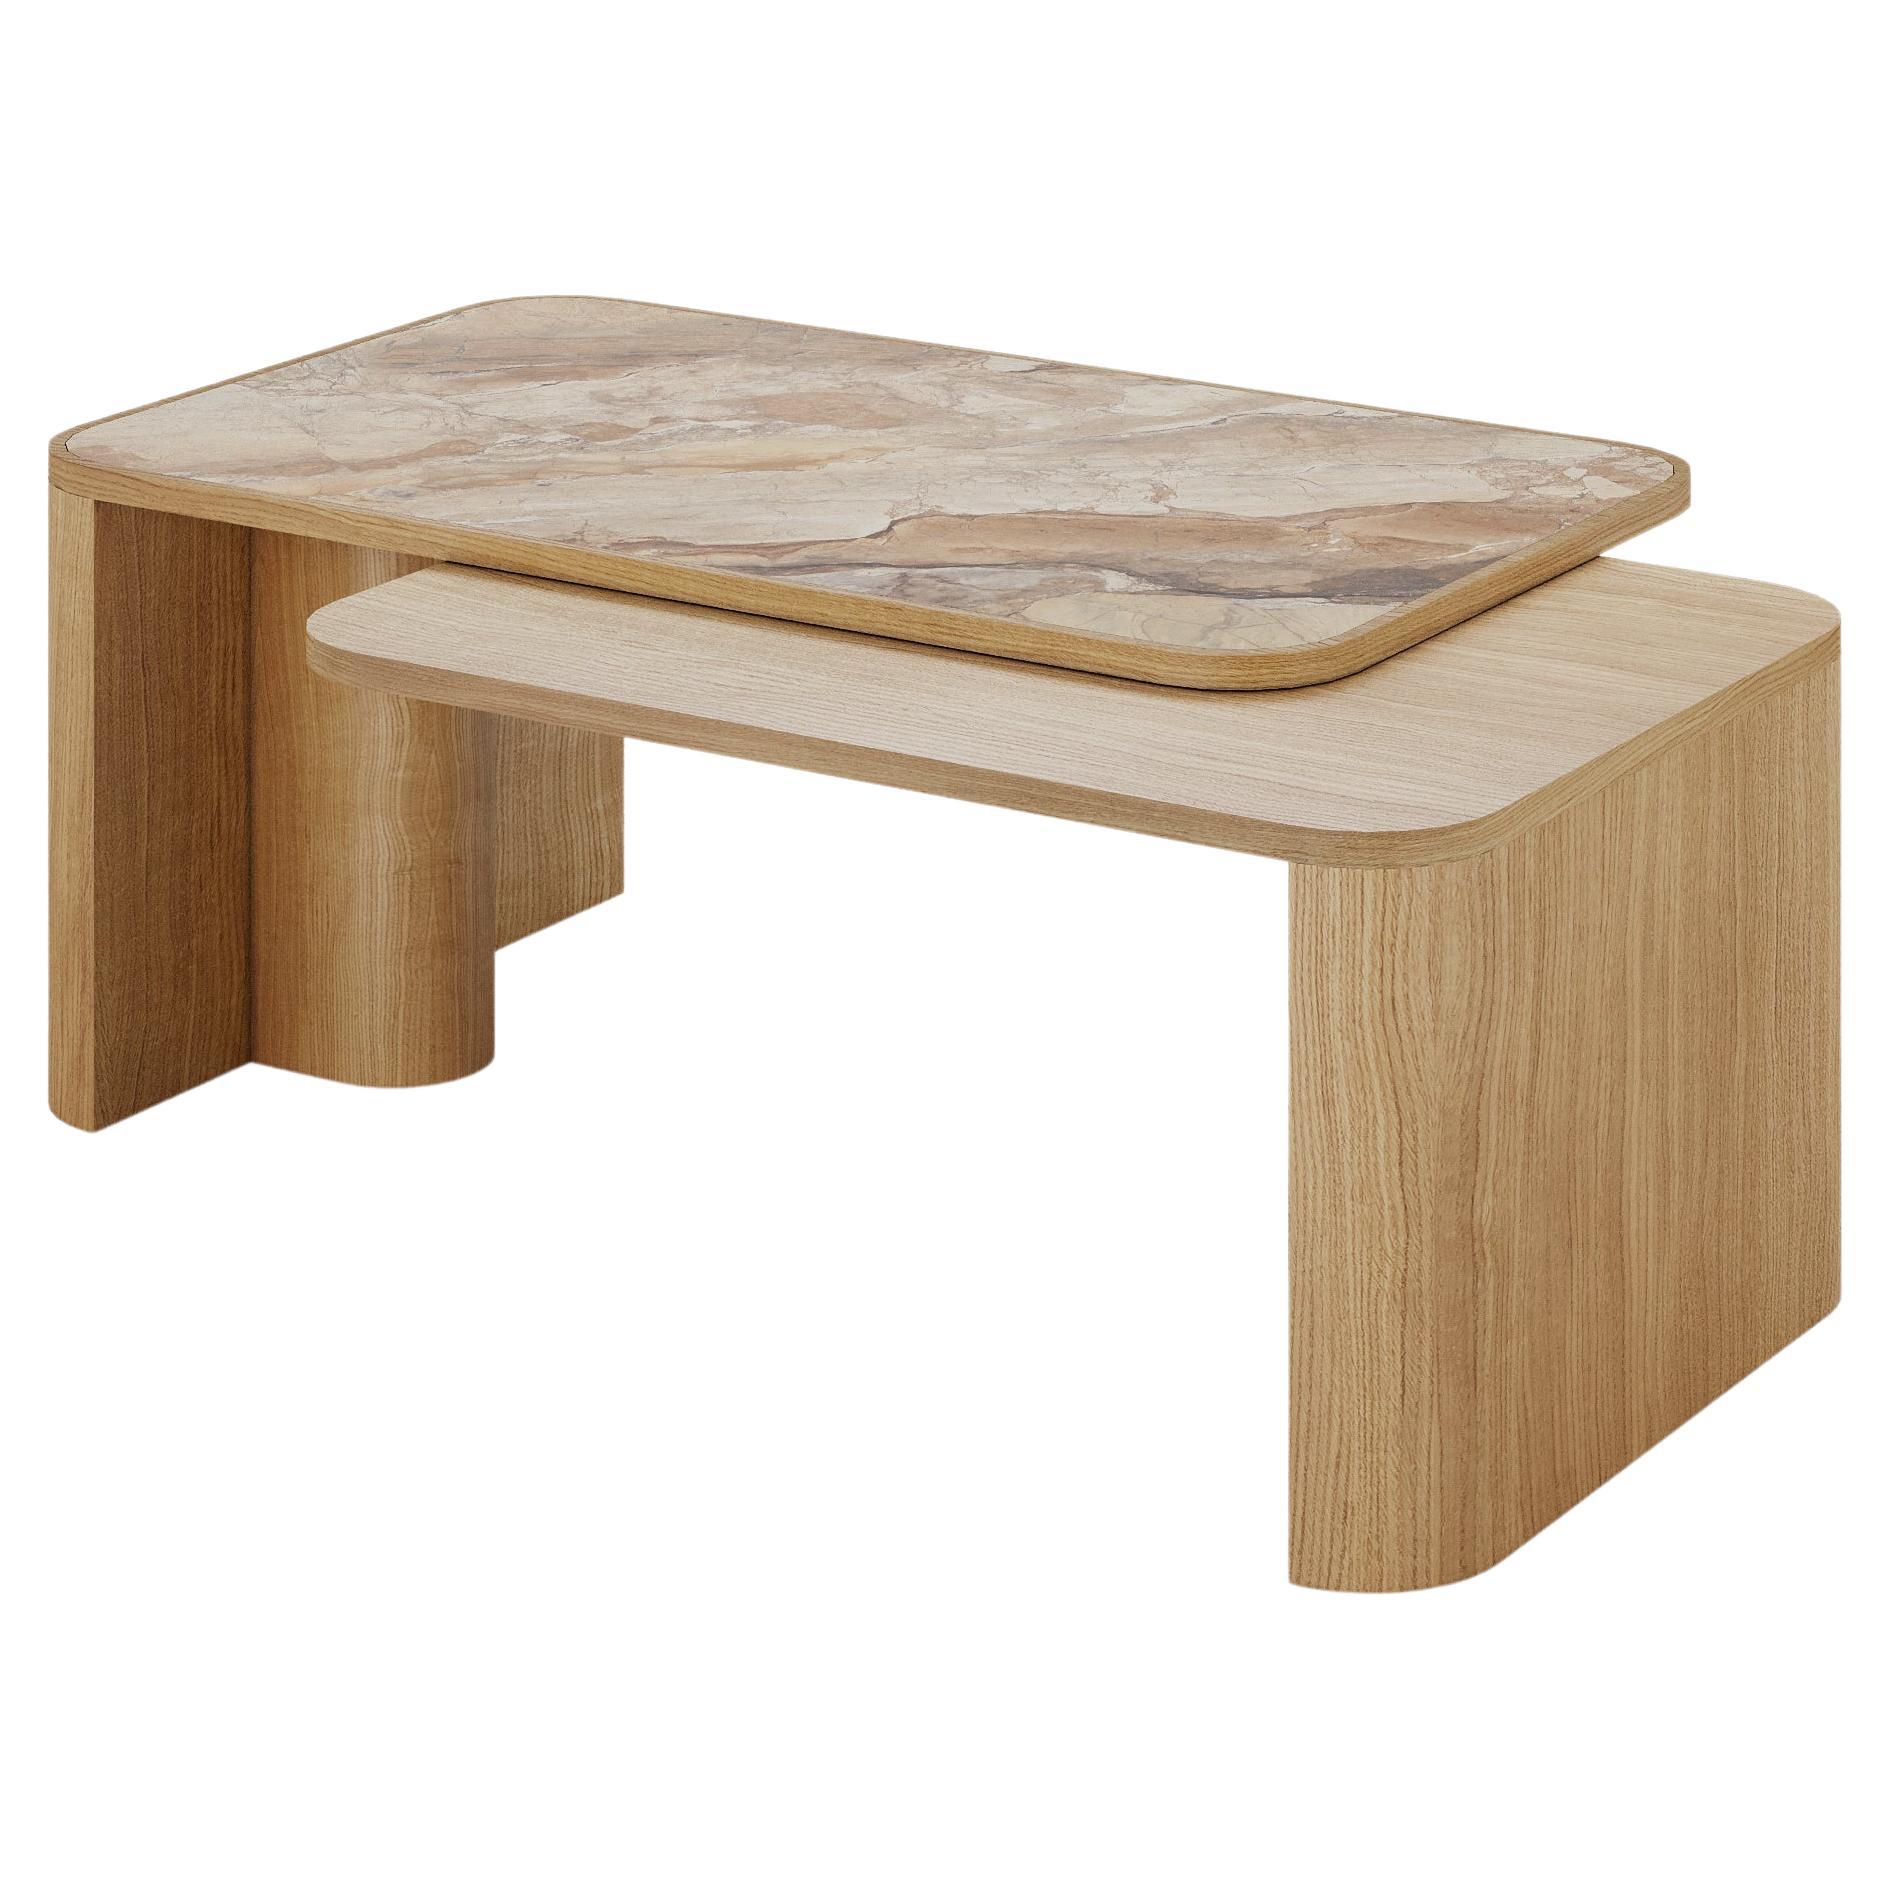 ZAGAS Statera Coffee Table